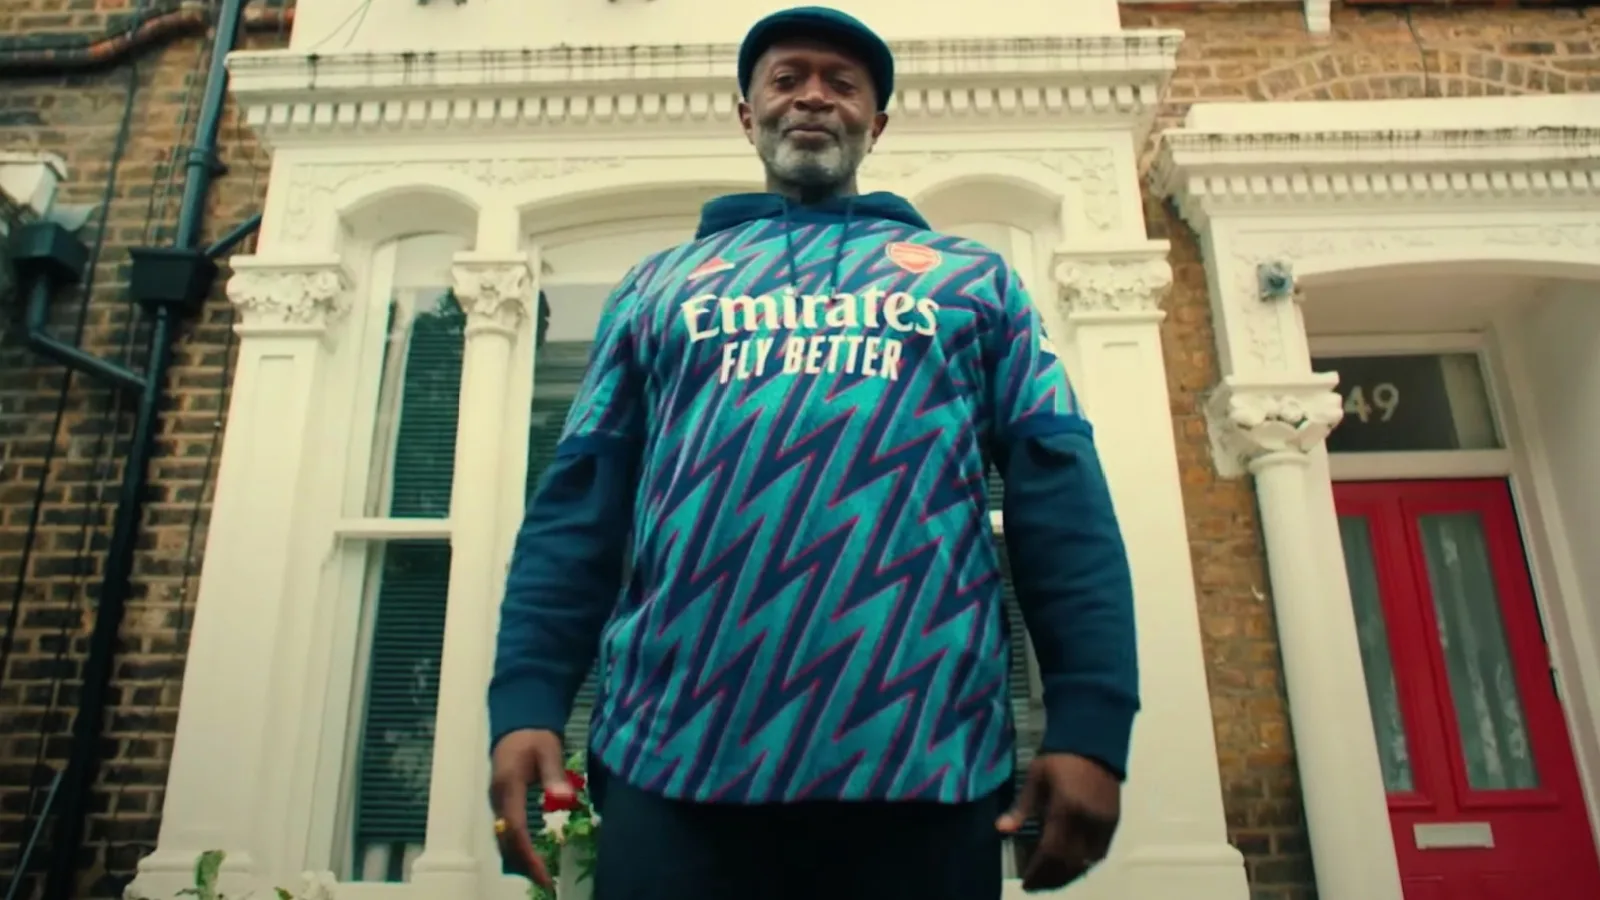 Arsenal superfan Len is the protagonist of the third kit reveal promo